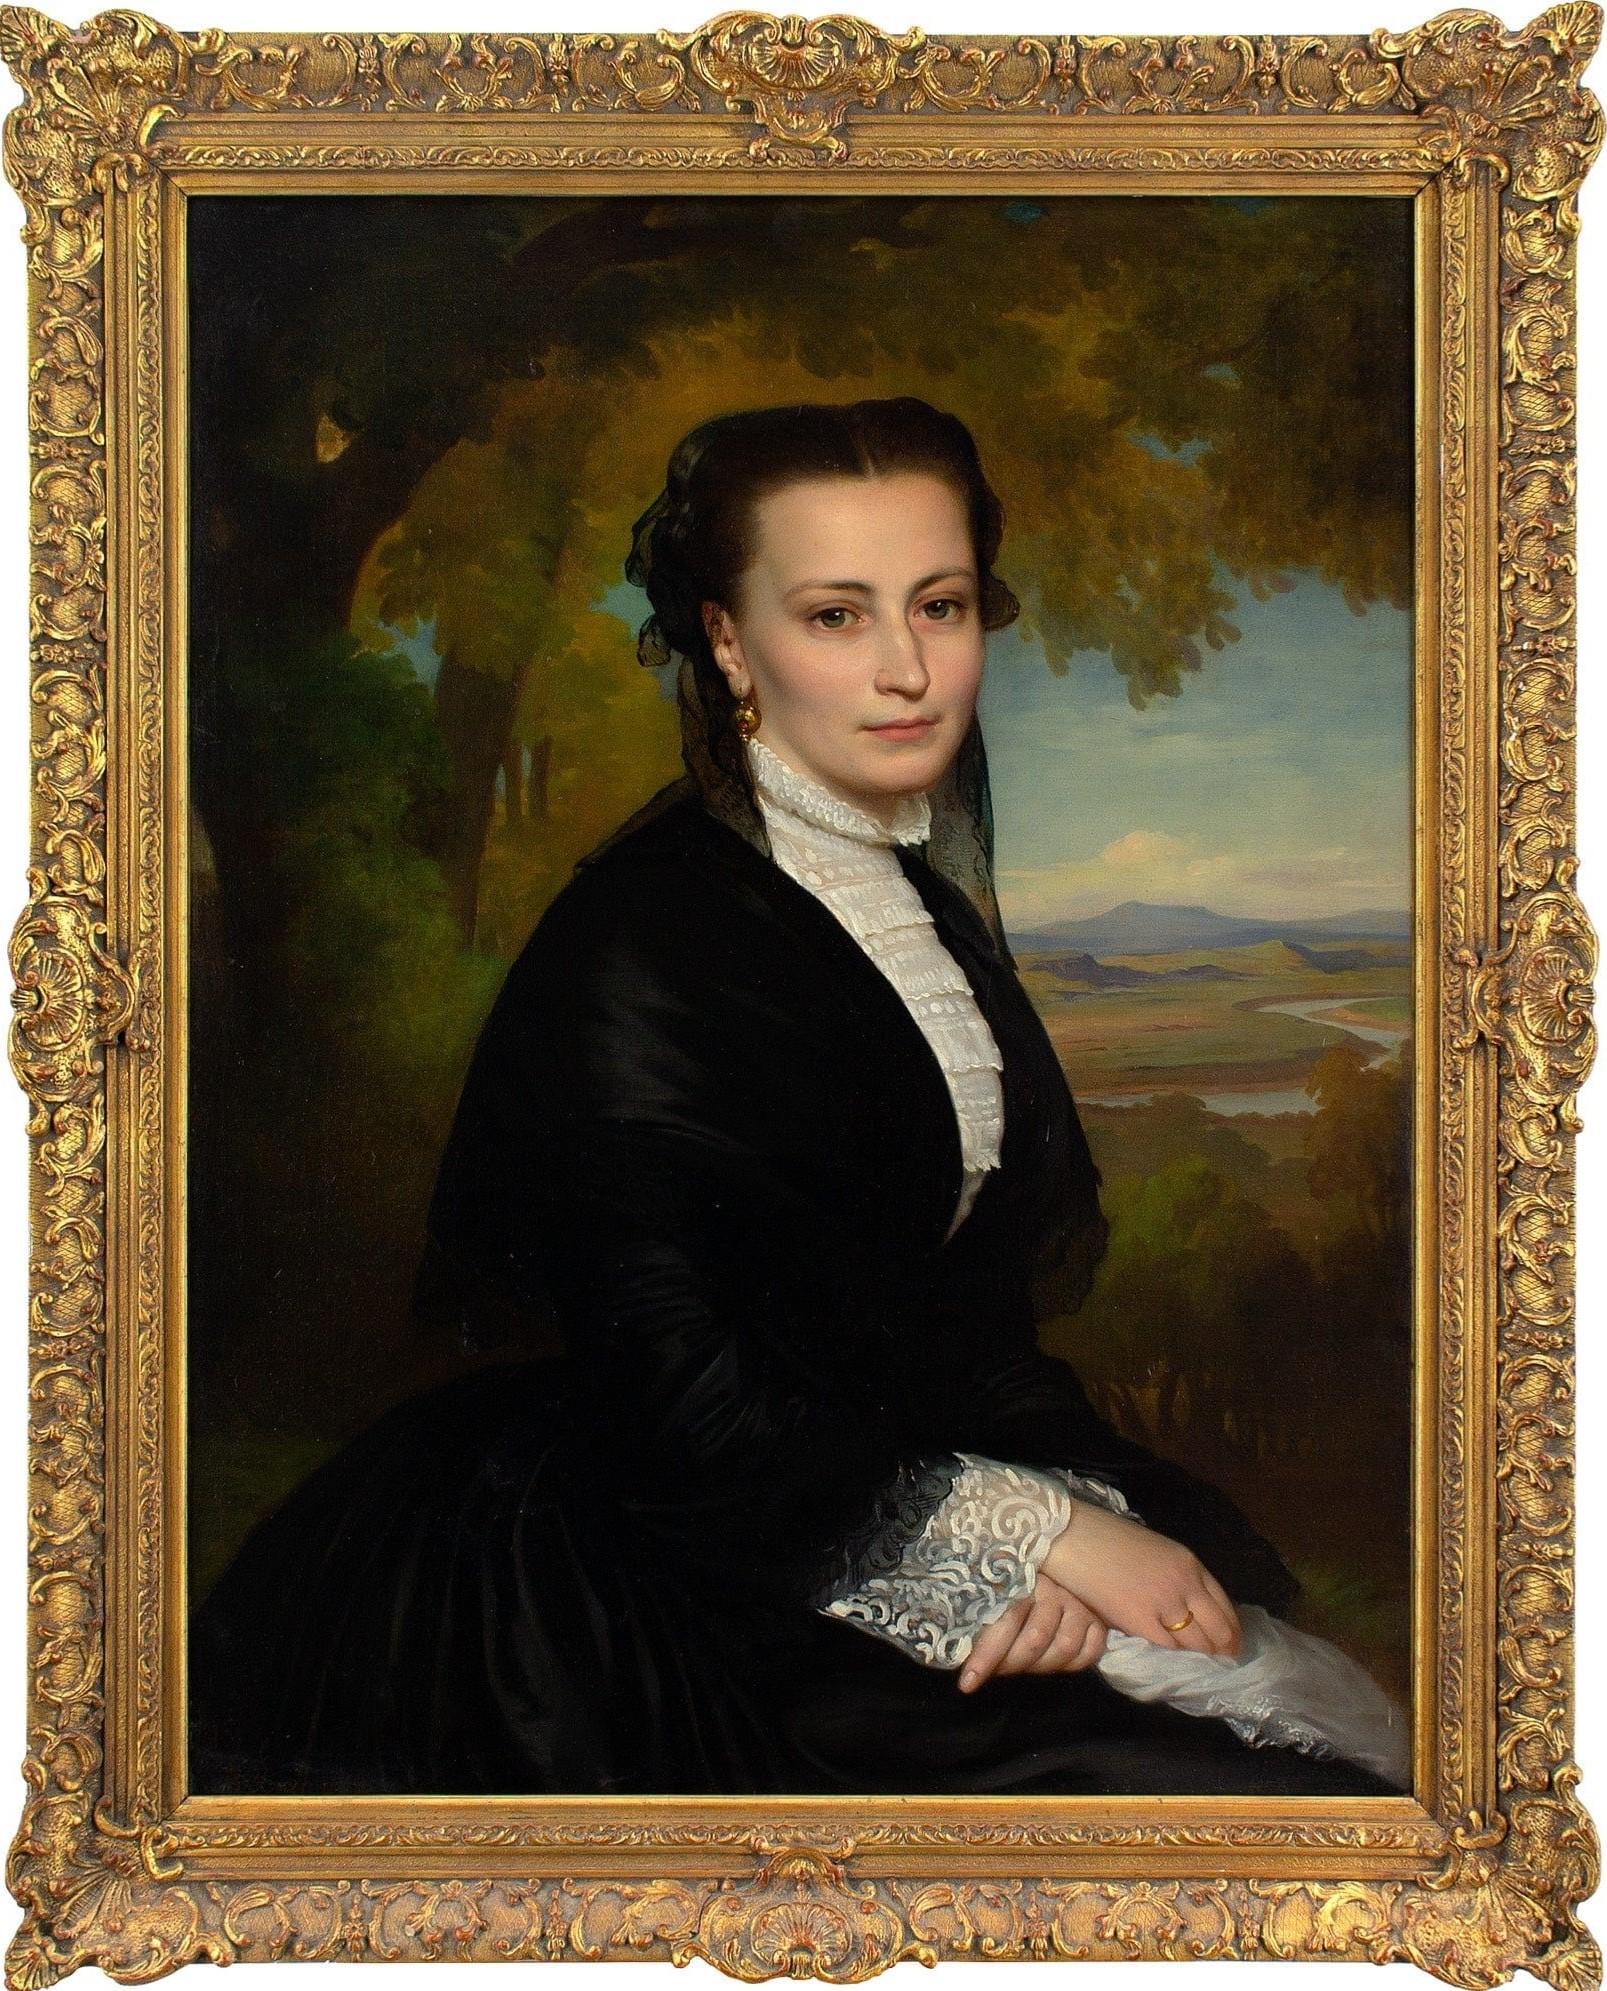 This exquisite mid-19th-century portrait by Austrian artist Heinrich Hollpein (1814-1888) depicts a lady before a classically-inspired landscape.

Attired in a fine black dress with lace embellishments, she rests within a tranquil setting. The glow